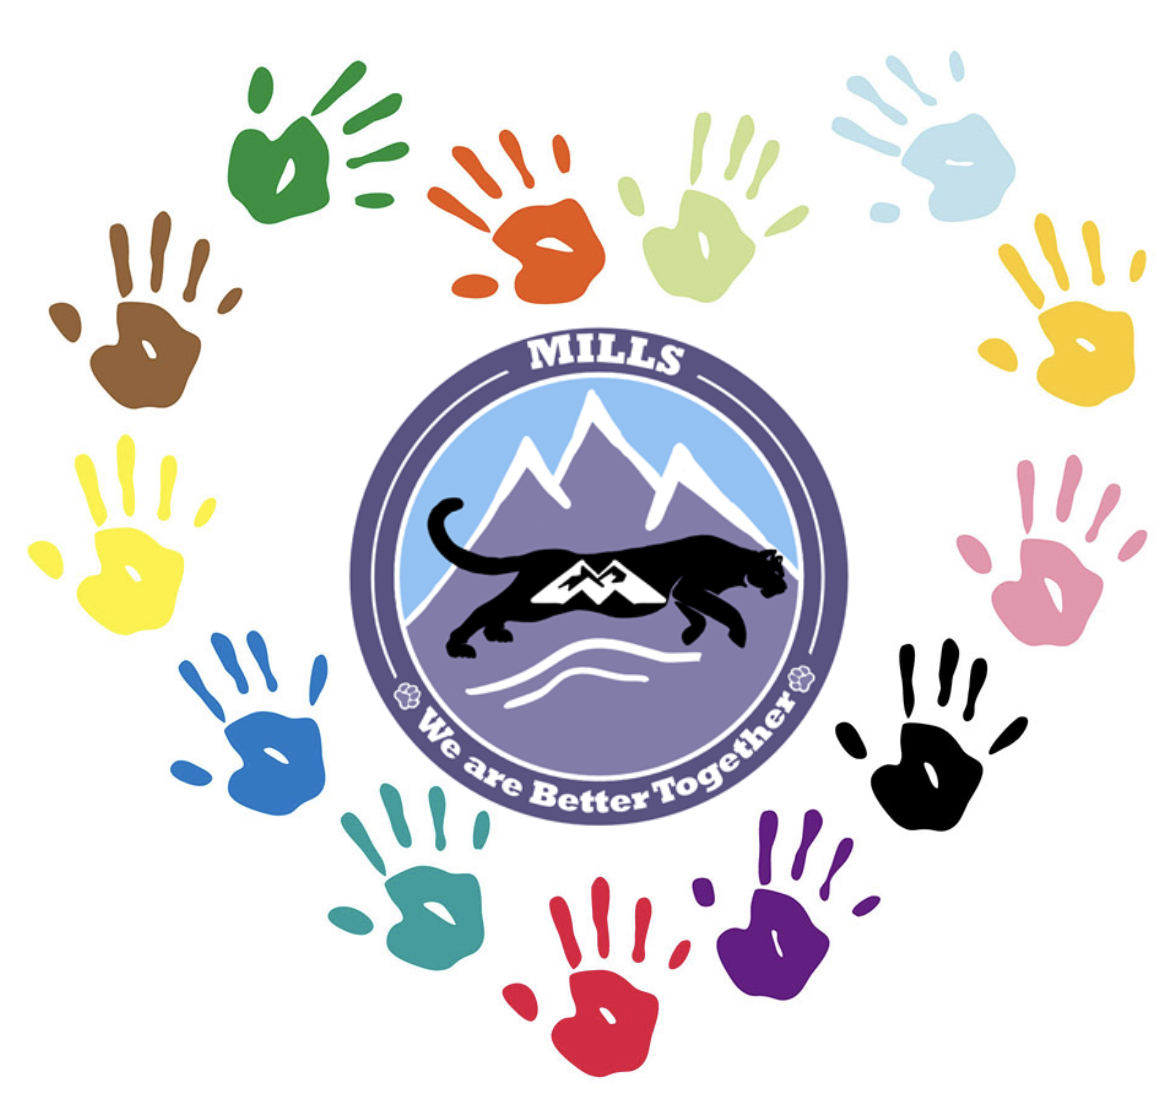 Mills logo surrounded by colorful hands